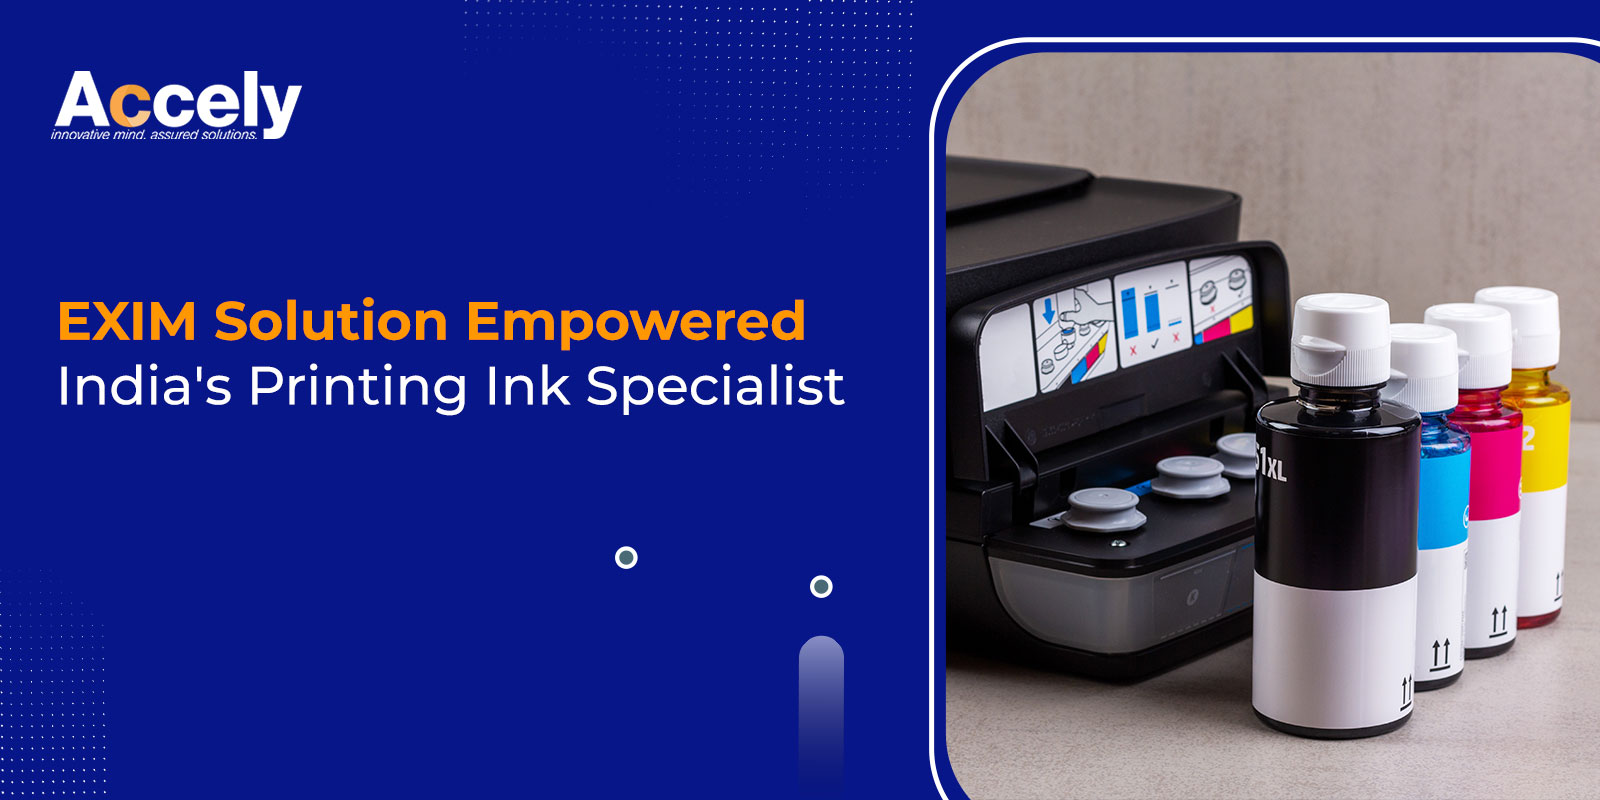 EXIM Solution Empowered India's Printing Ink Specialist